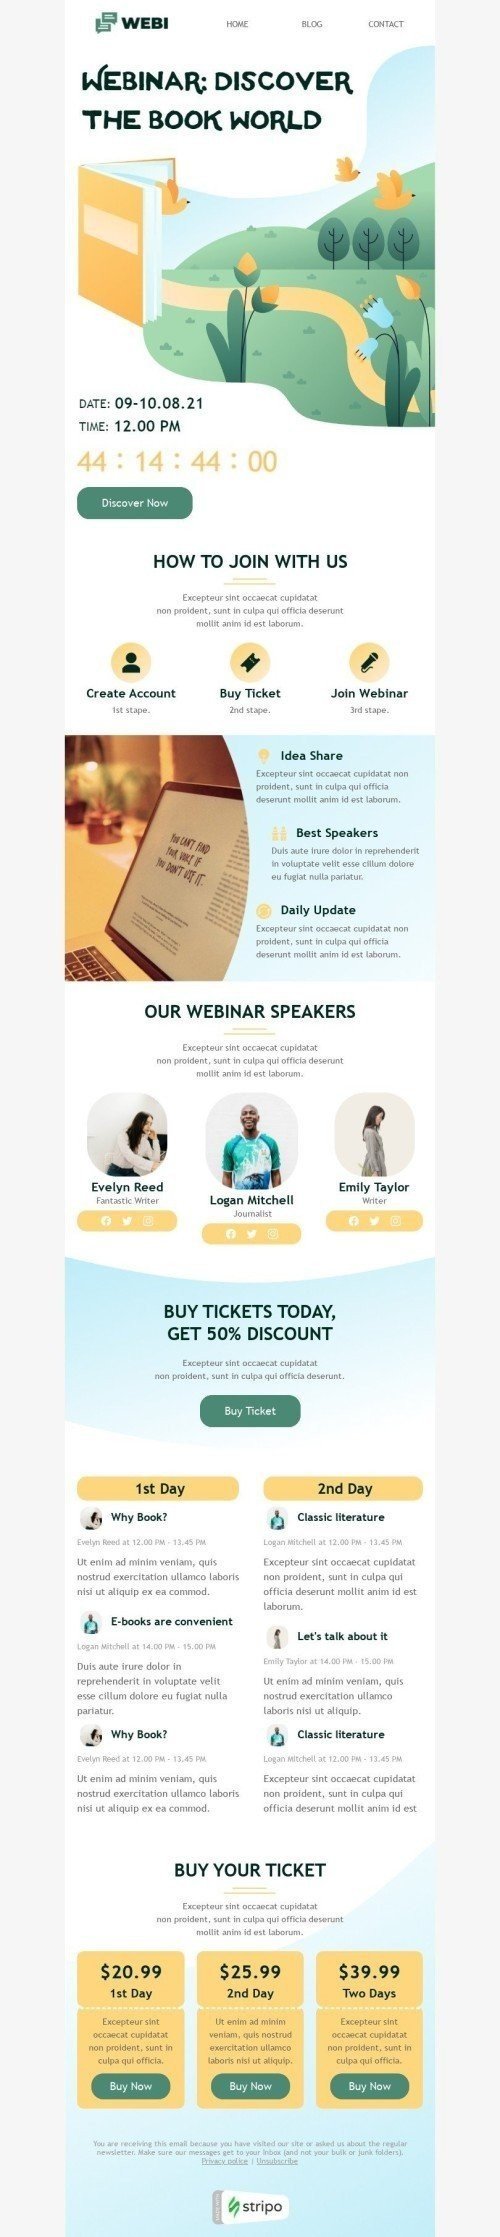 Book Lovers Day Email Template "Discover the book world" for Publications & Blogging industry desktop view